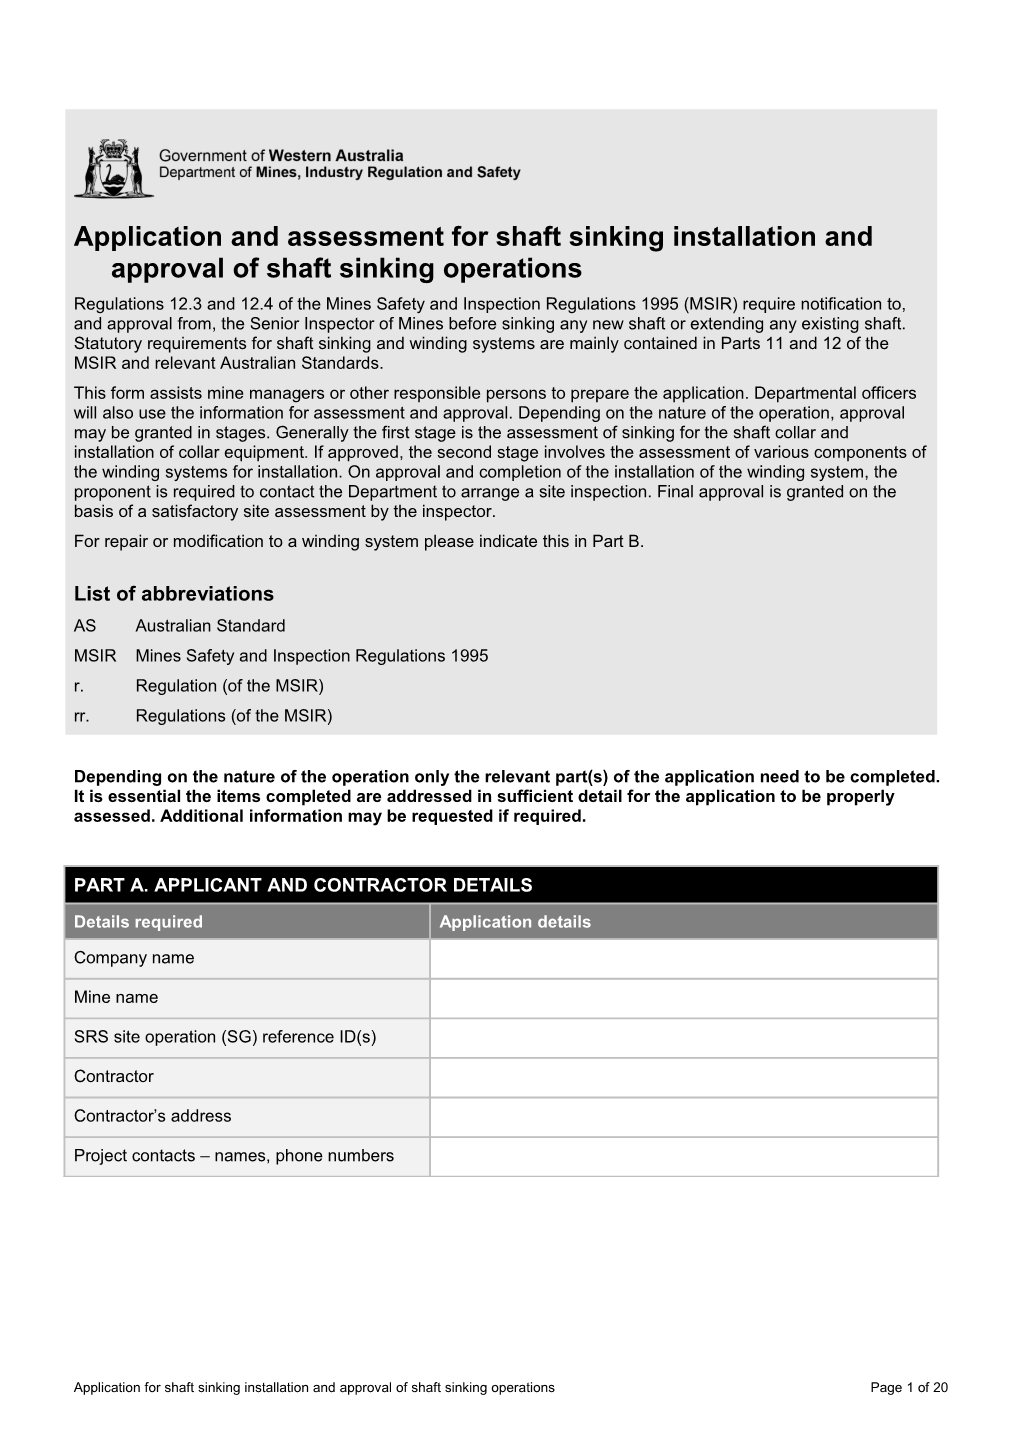 Application and Assessment for Shaft Sinking Installation and Approval of Shaft Sinking